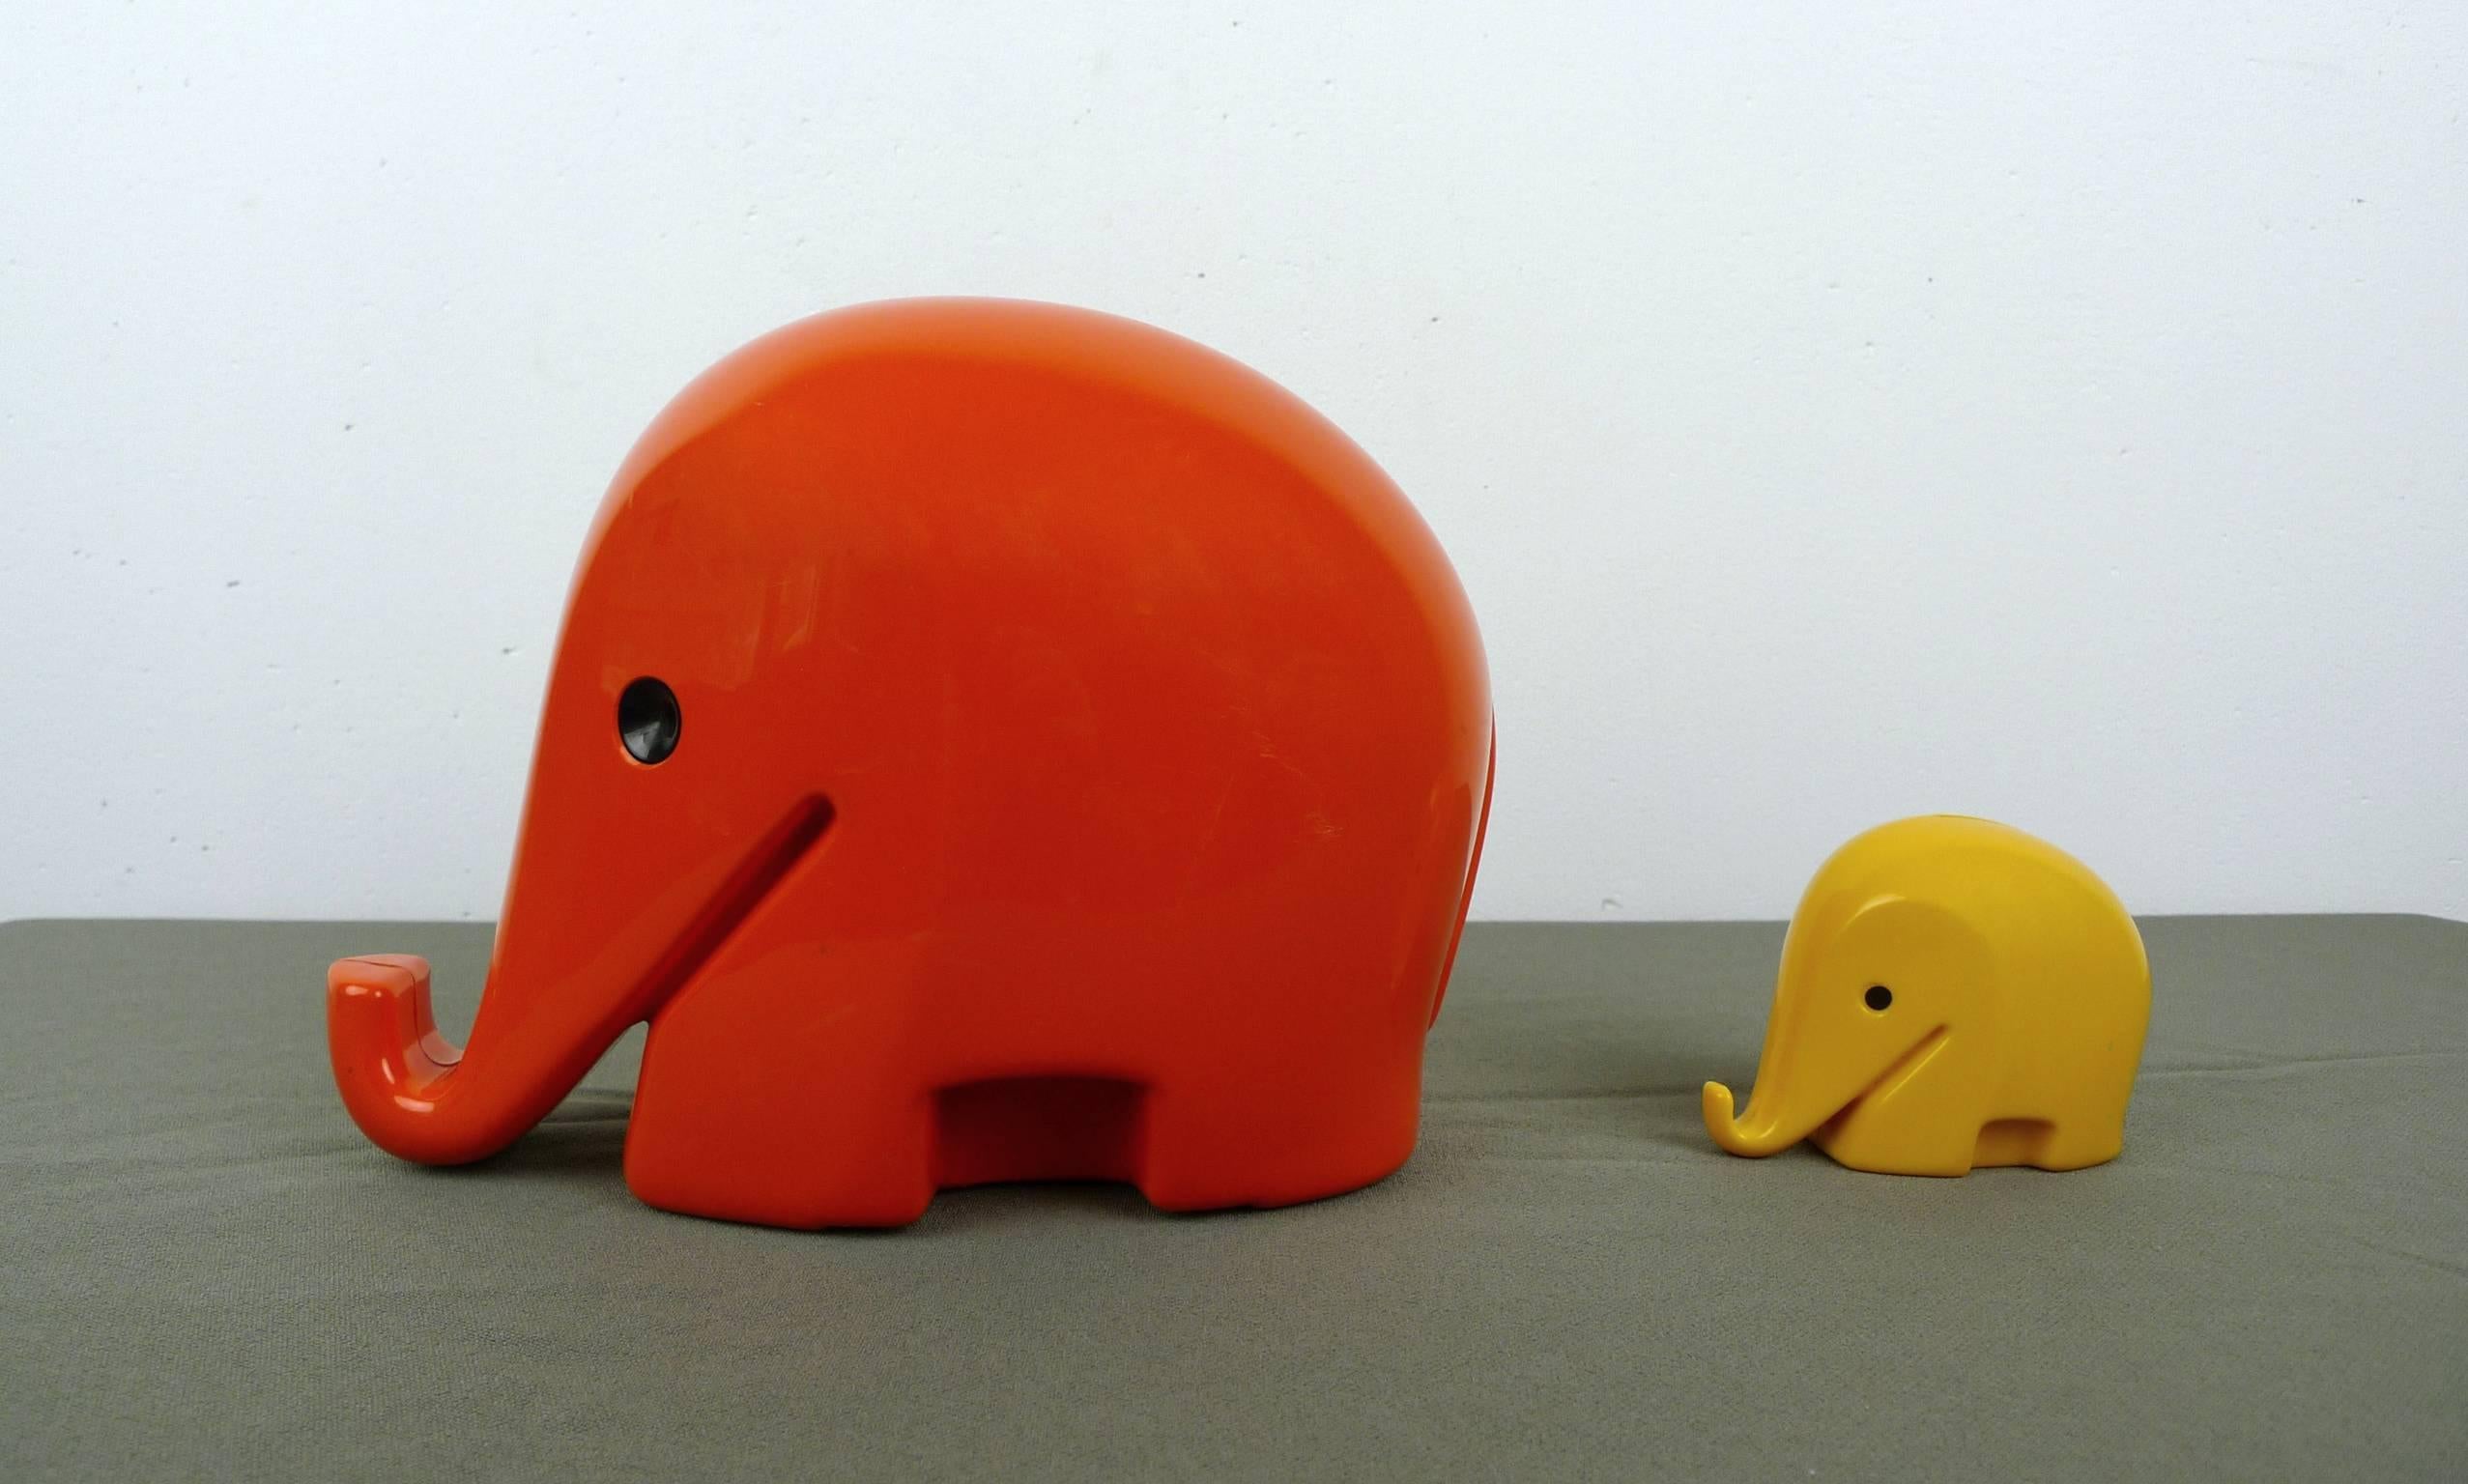 This large orange-red and small yellow Drumbo money-box were designed by Luigi Colani in the 1970s on behalf of Dresdner Bank as a giveaway. The large elephant can be emptied by means of a key, while the small elephant is locked and must be broken